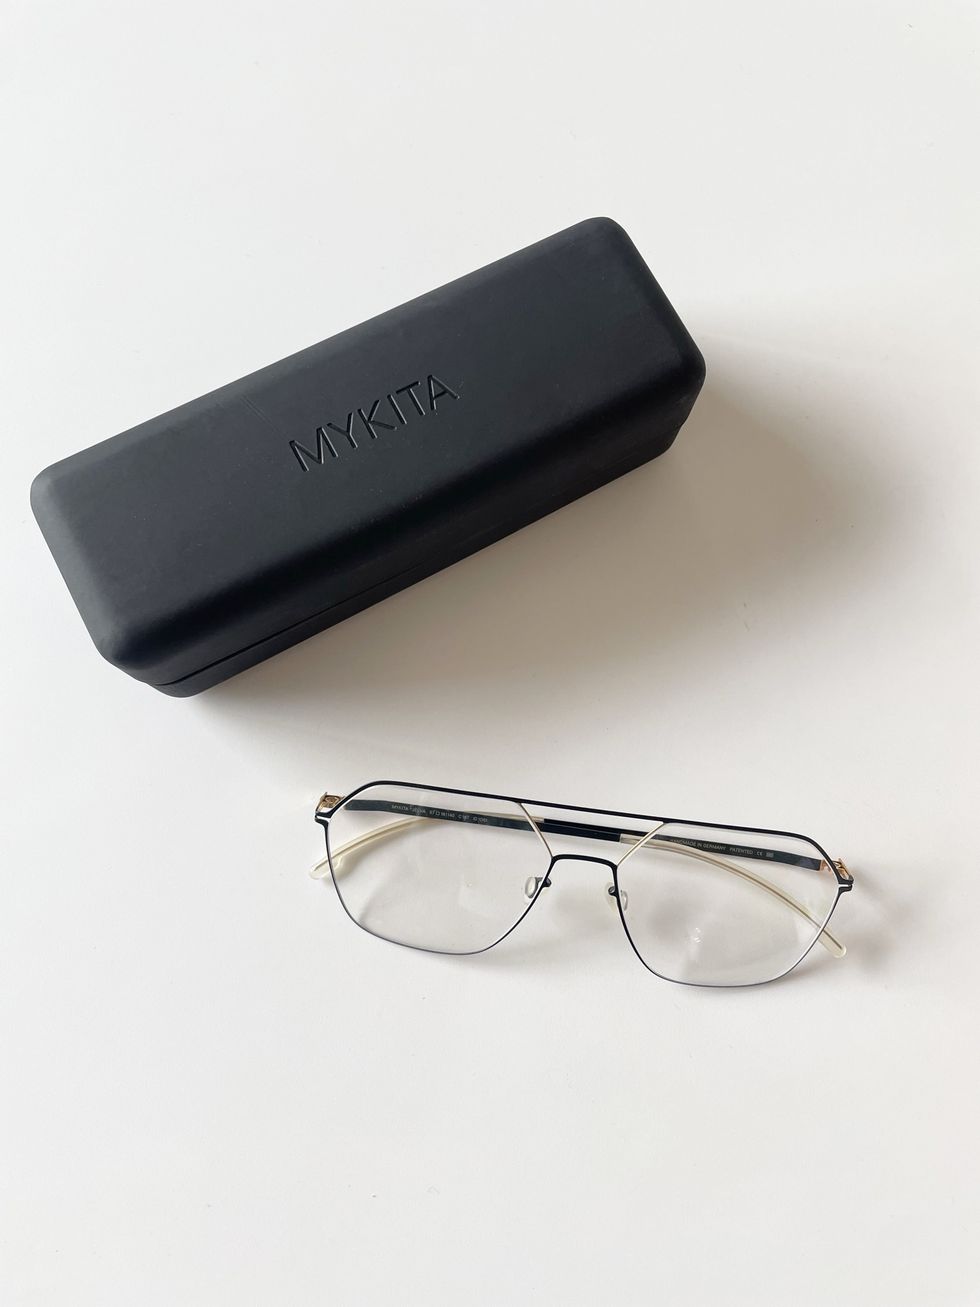 a black rectangular object with glasses